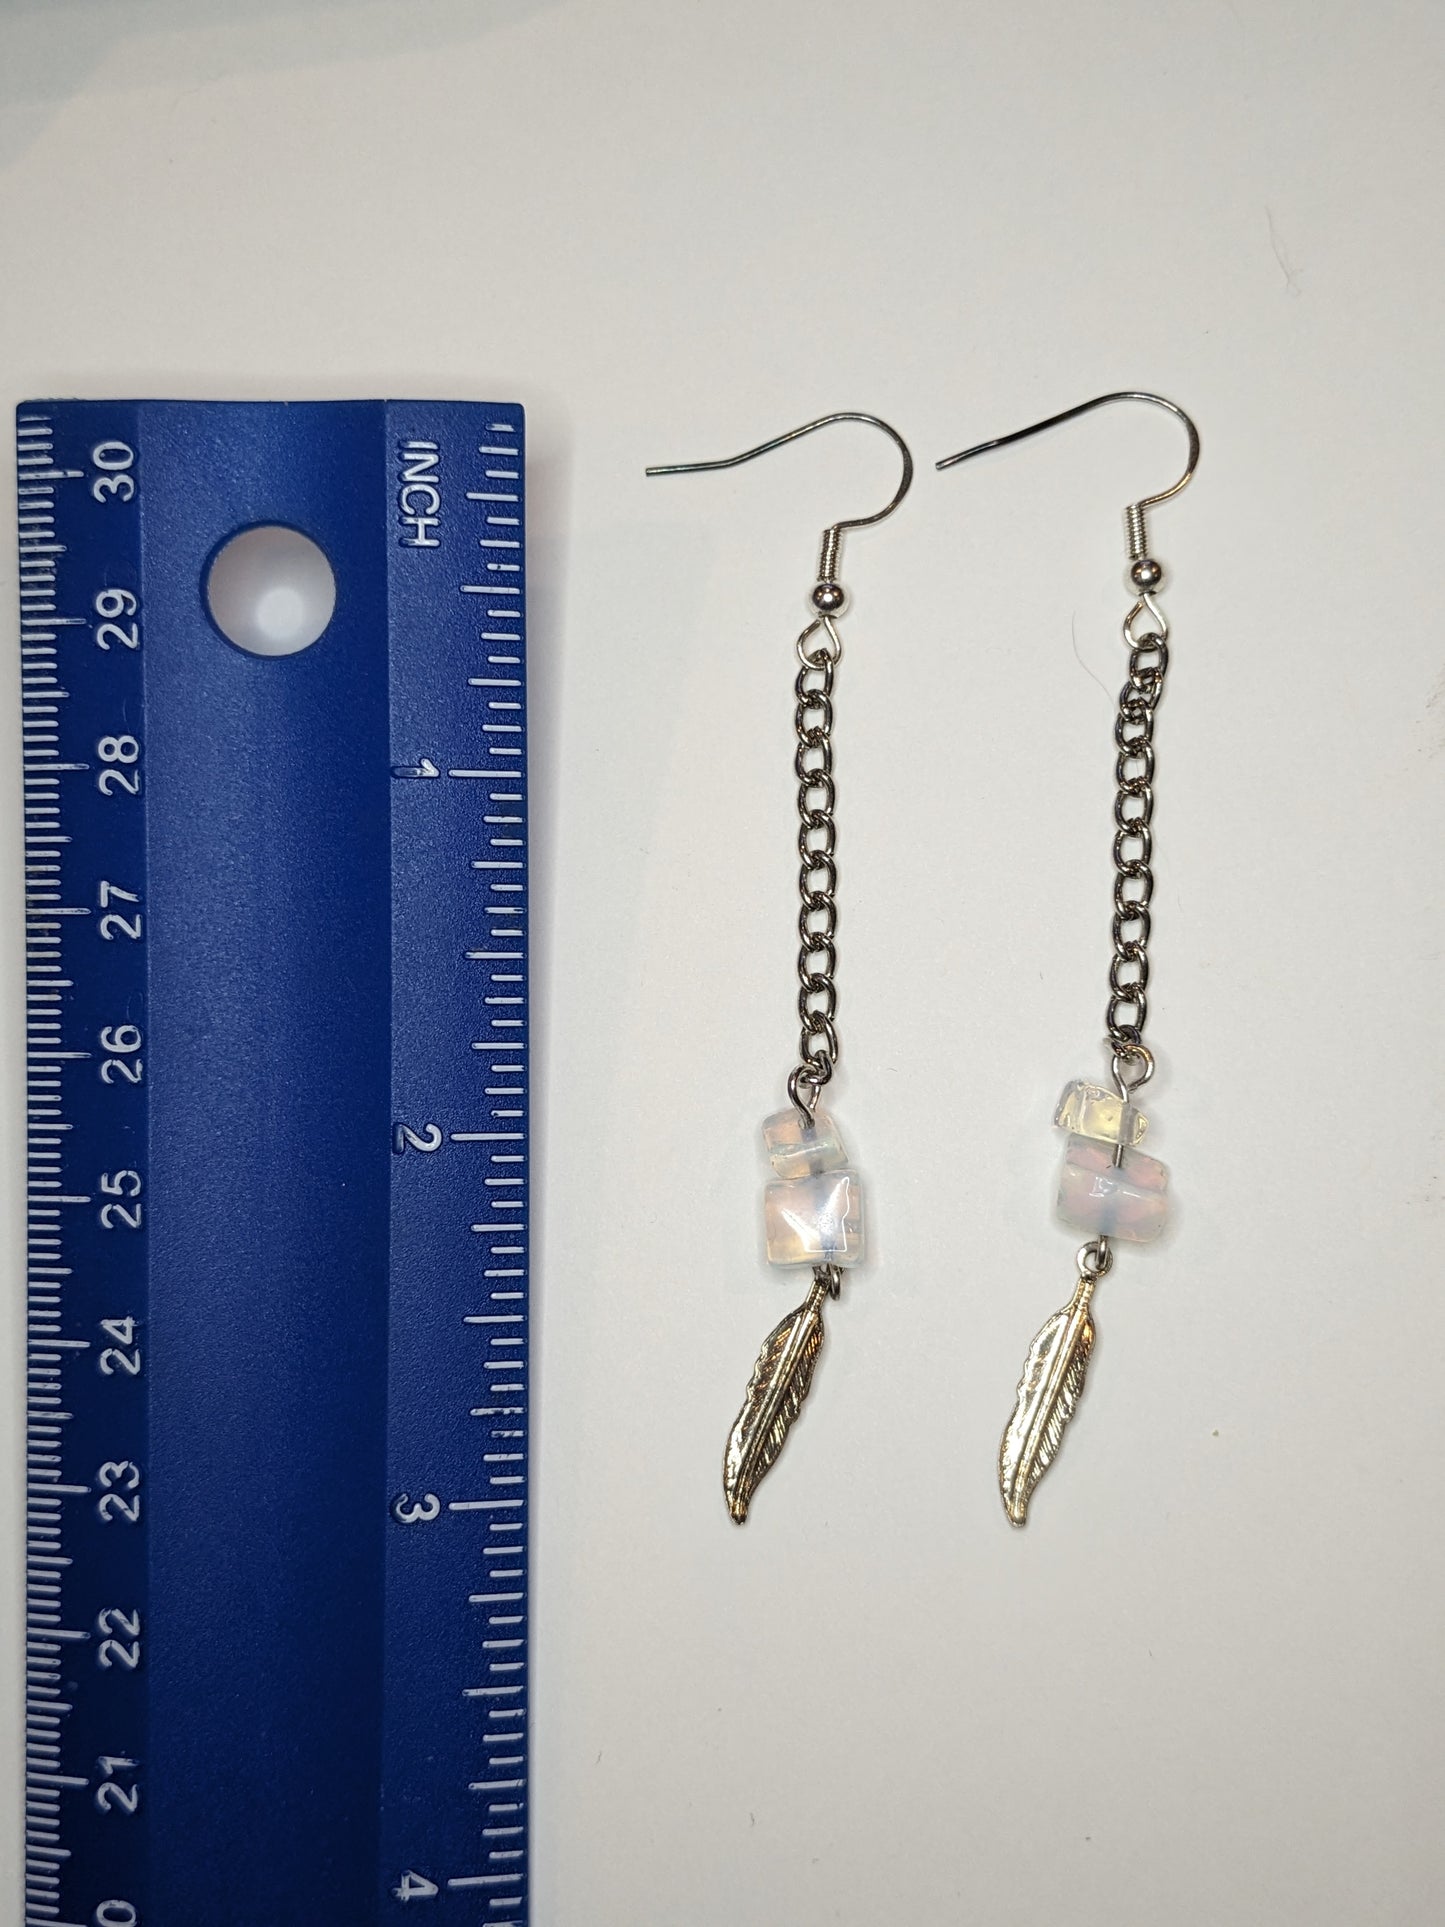 Earrings next to a blue ruler showing the earrings are 3 inches long. 